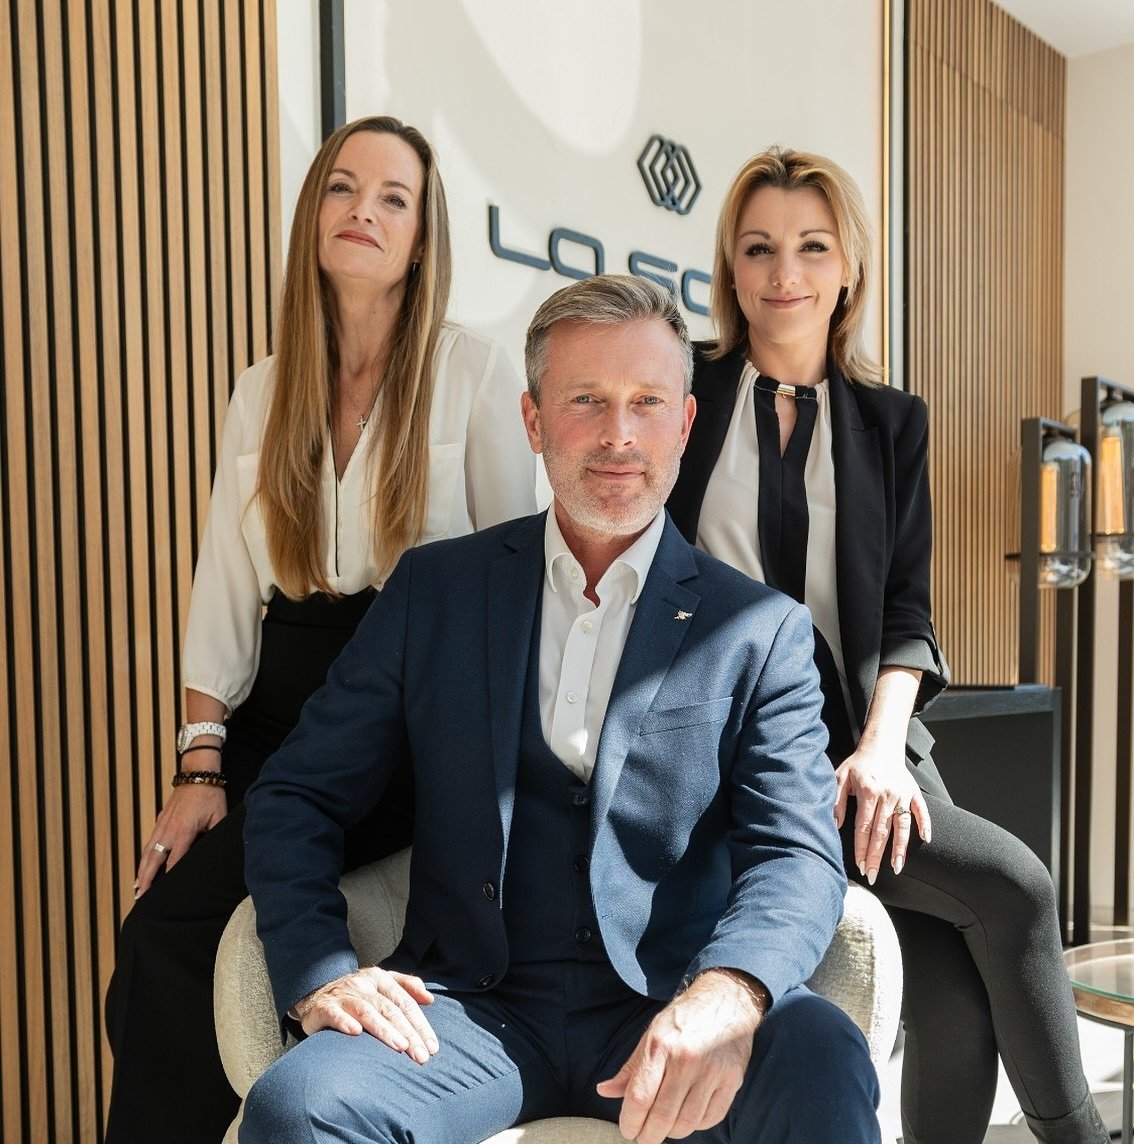 &ldquo;We are unique, we are different, we have the experience and reach to support the property needs &amp; objectives required to facilitate the needs of our fabulous community of customers when buying or investing in the Marbella lifestyle.&rdquo;